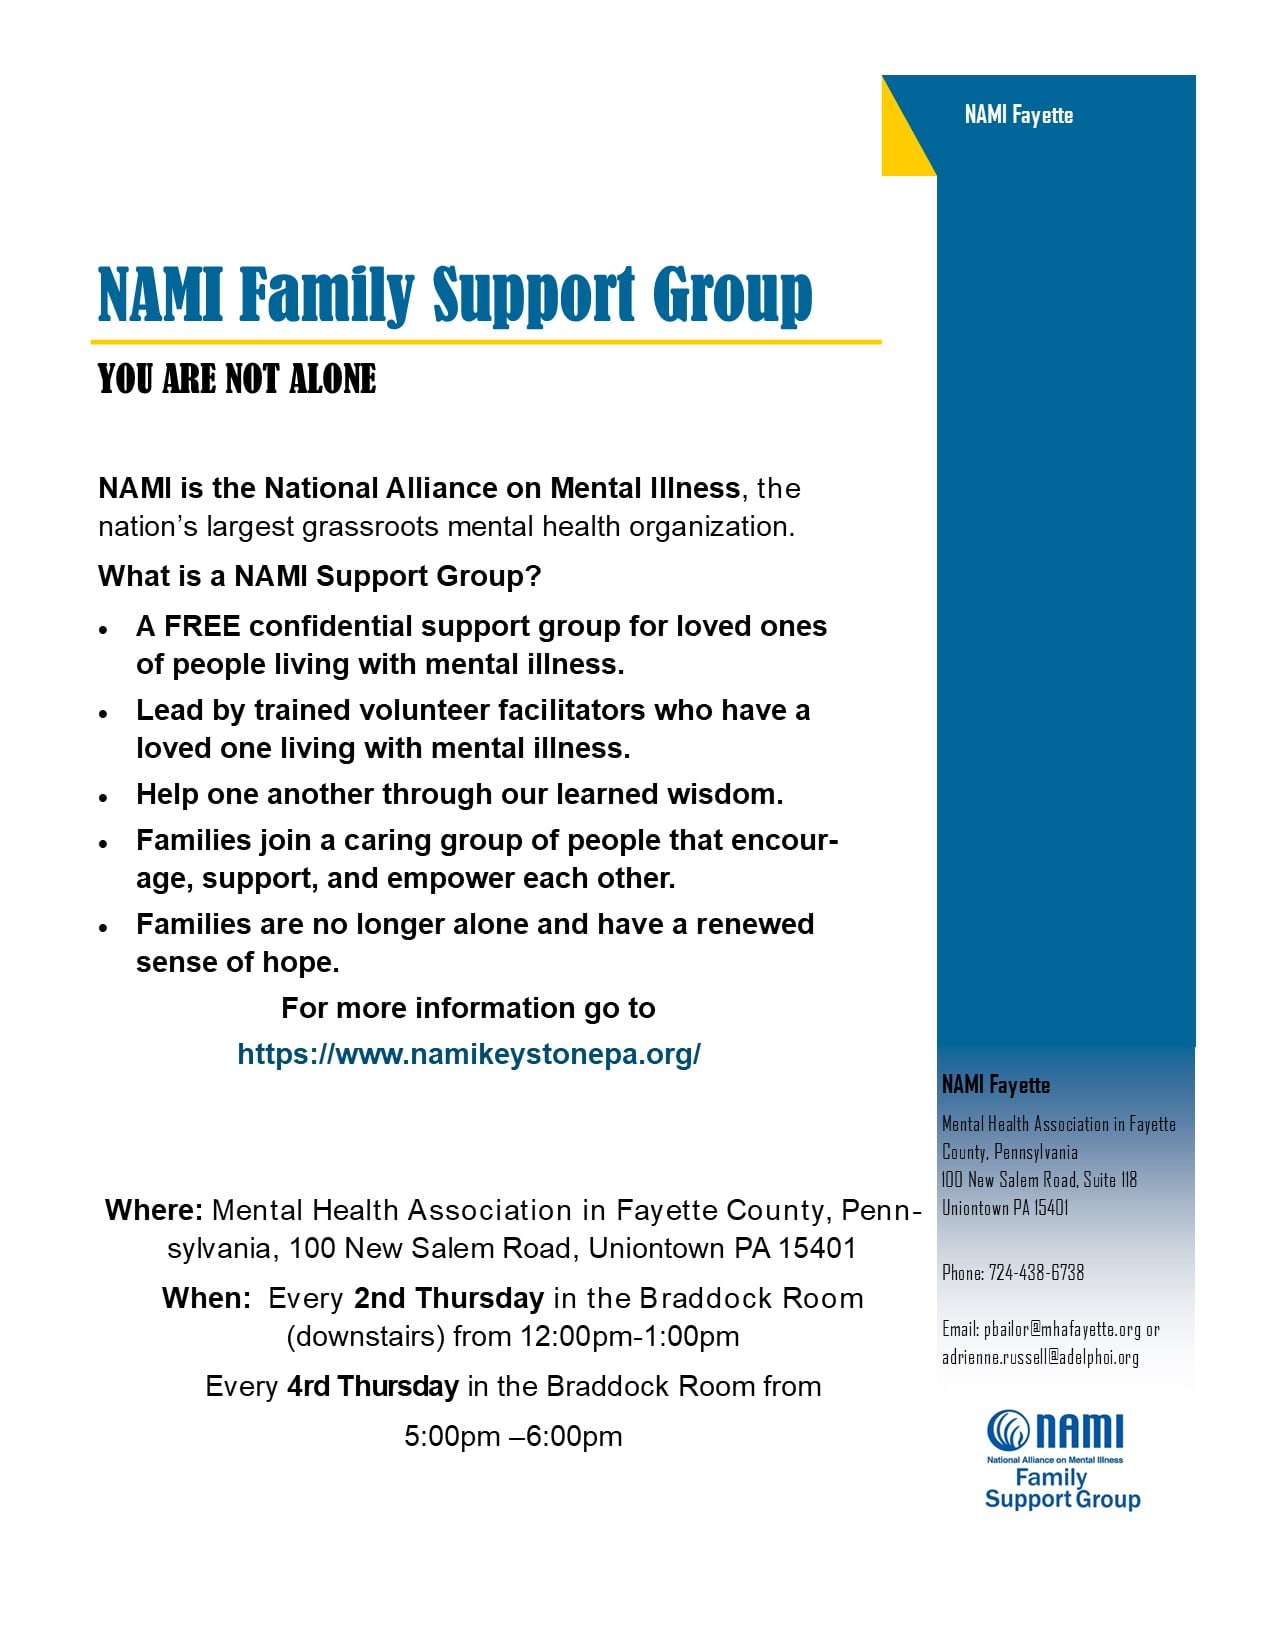 NAMI Family Support Group Flyer